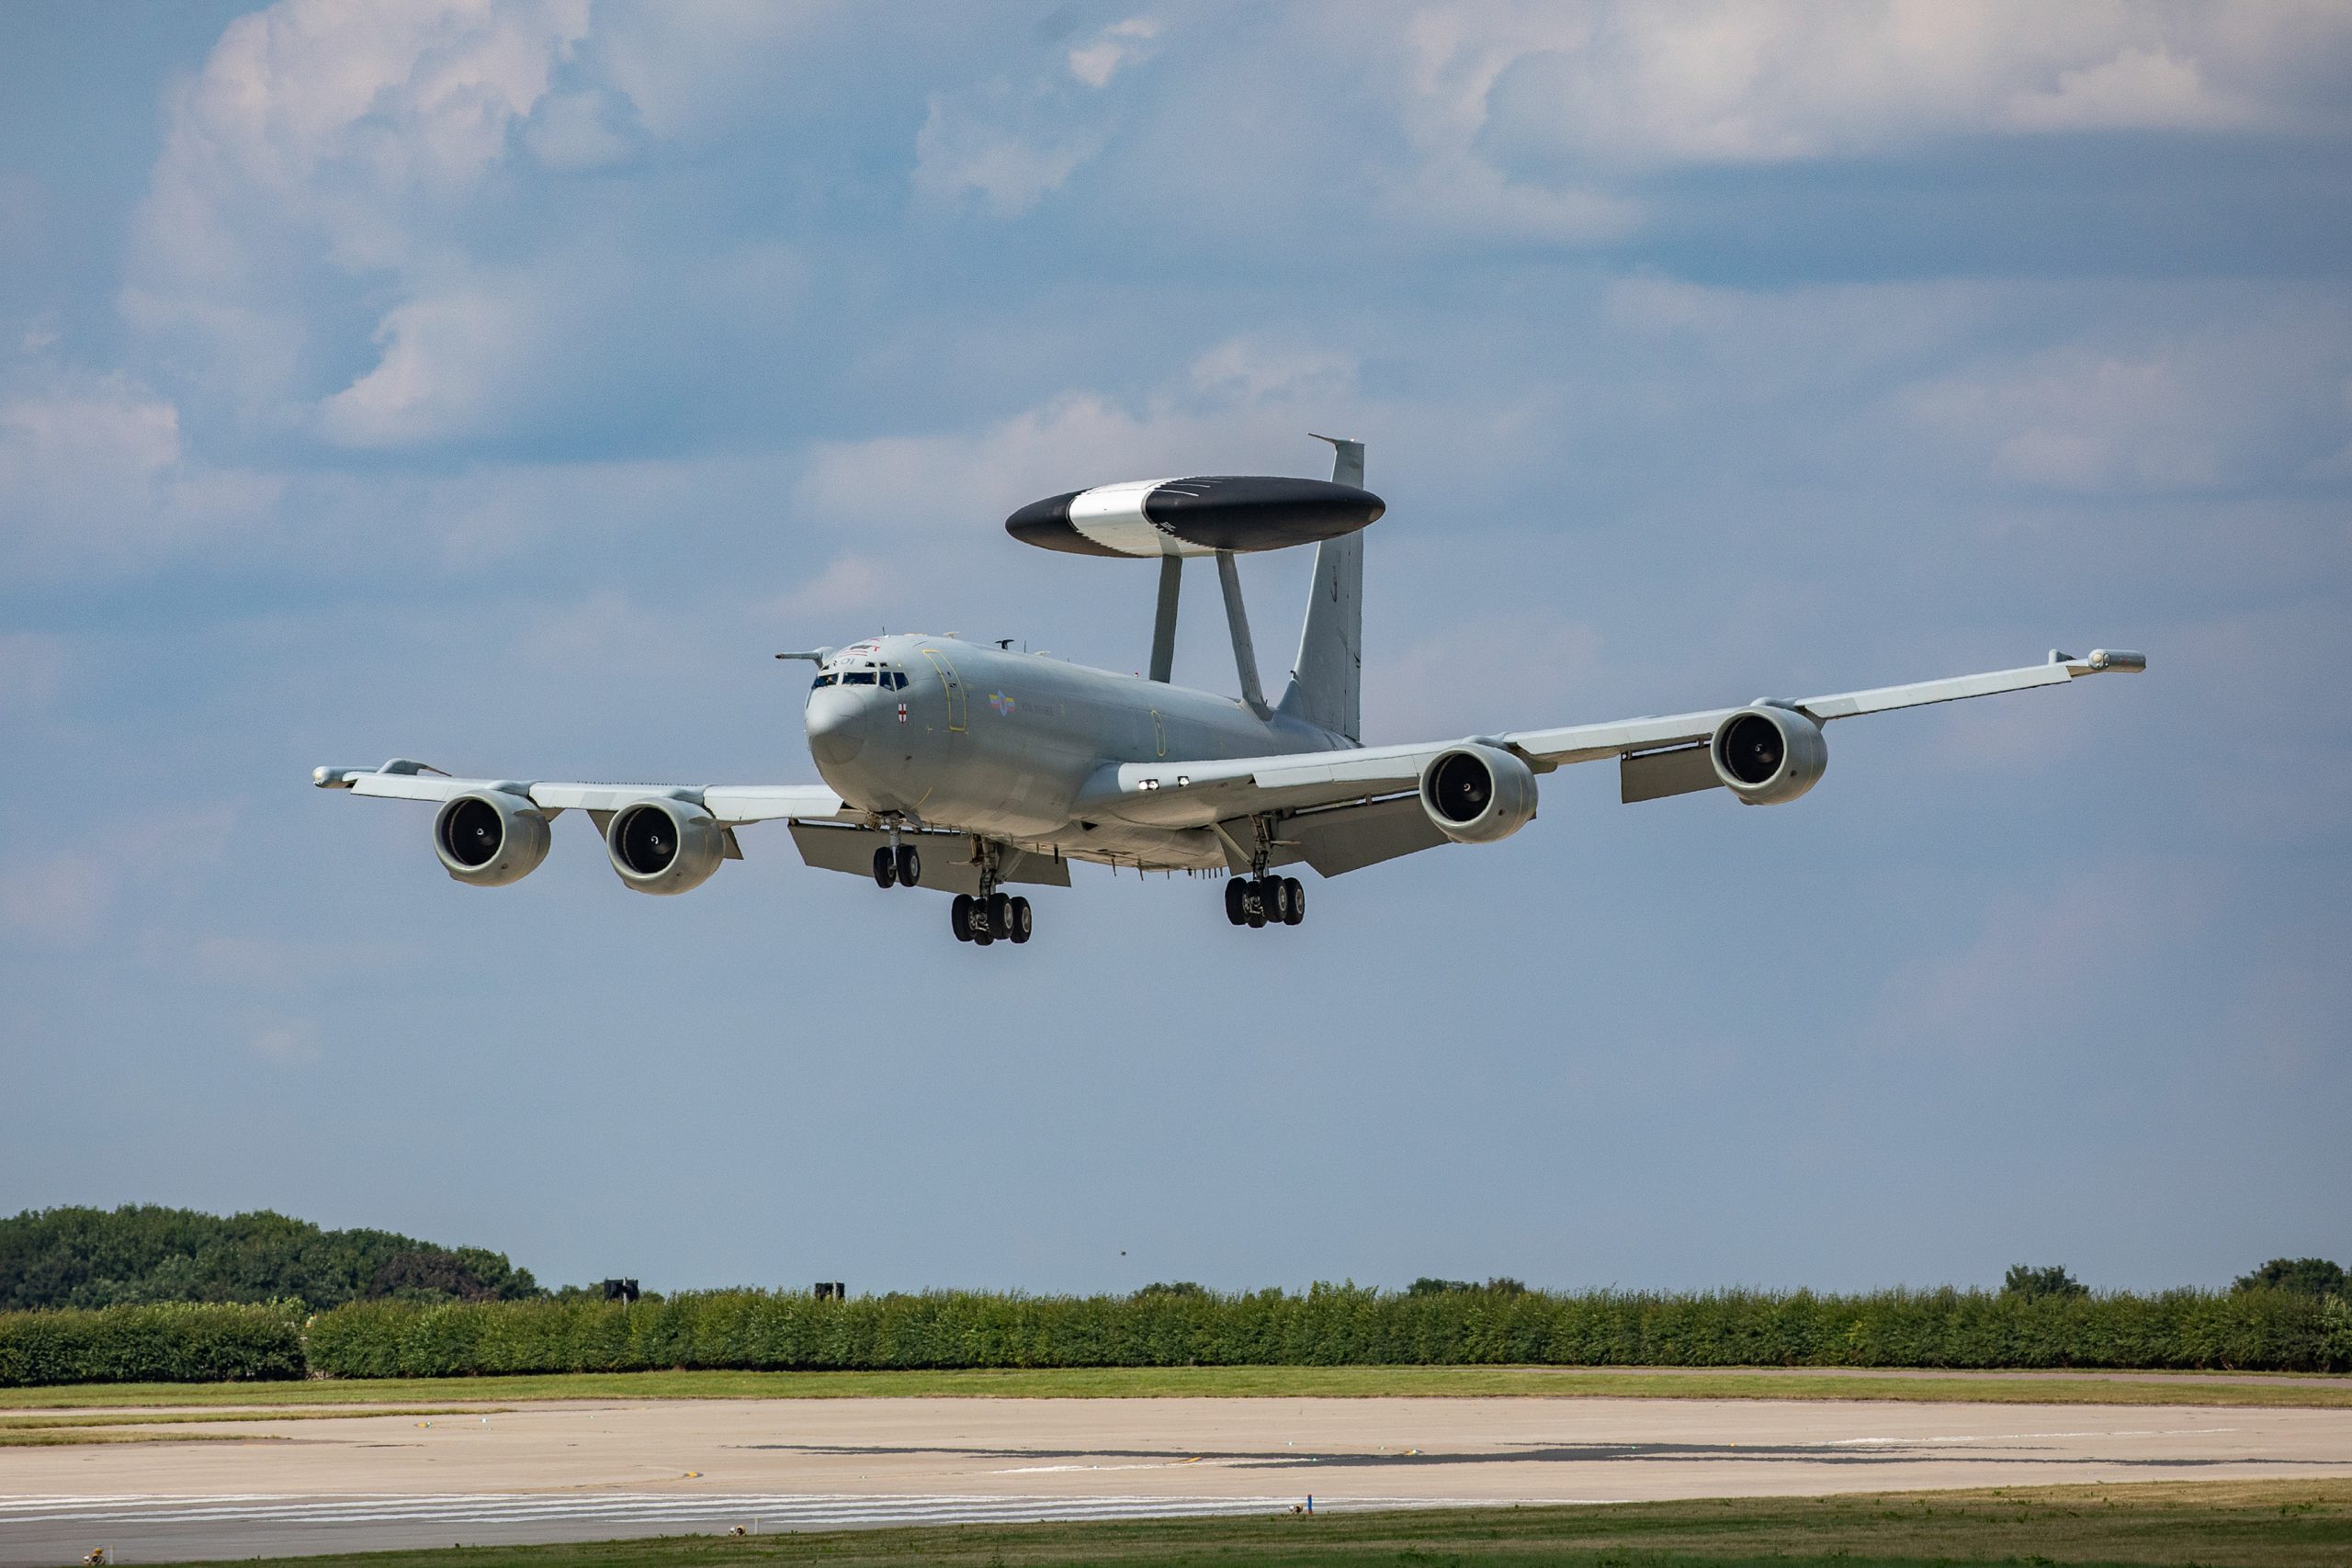 RAF E-3D Sentry Aircraft Returns To The UK From Last Operational Mission